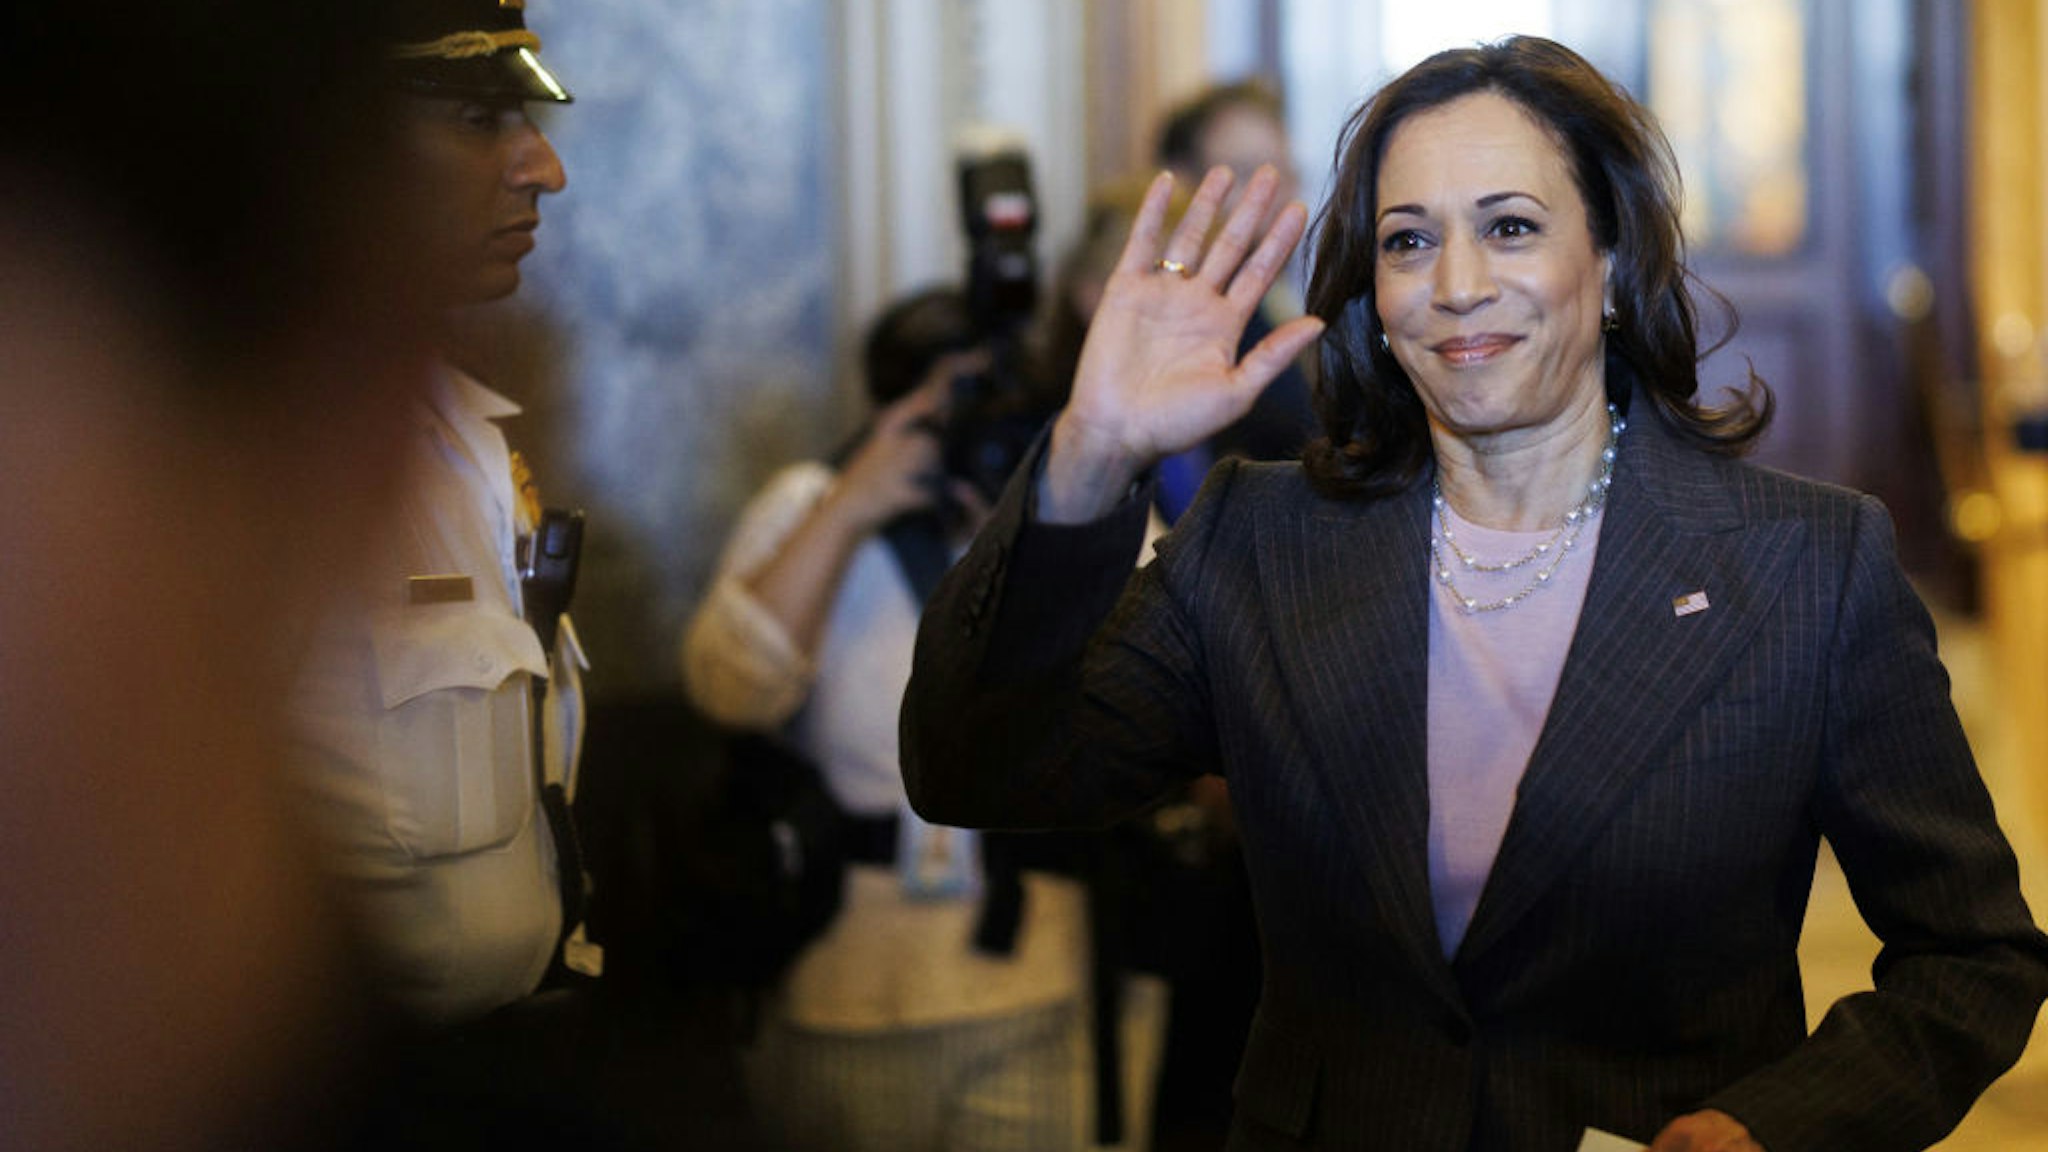 US Vice President Kamala Harris walks through the US Capitol building in Washington, D.C., US, on Sunday, Aug. 7, 2022. The Senate passed a landmark tax, climate and health-care bill, speeding a slimmed-down version of President Joe Biden's domestic agenda on a path to becoming law after a year of Democratic infighting that the White House was unable to control. Photographer: Ting Shen/Bloomberg via Getty Images